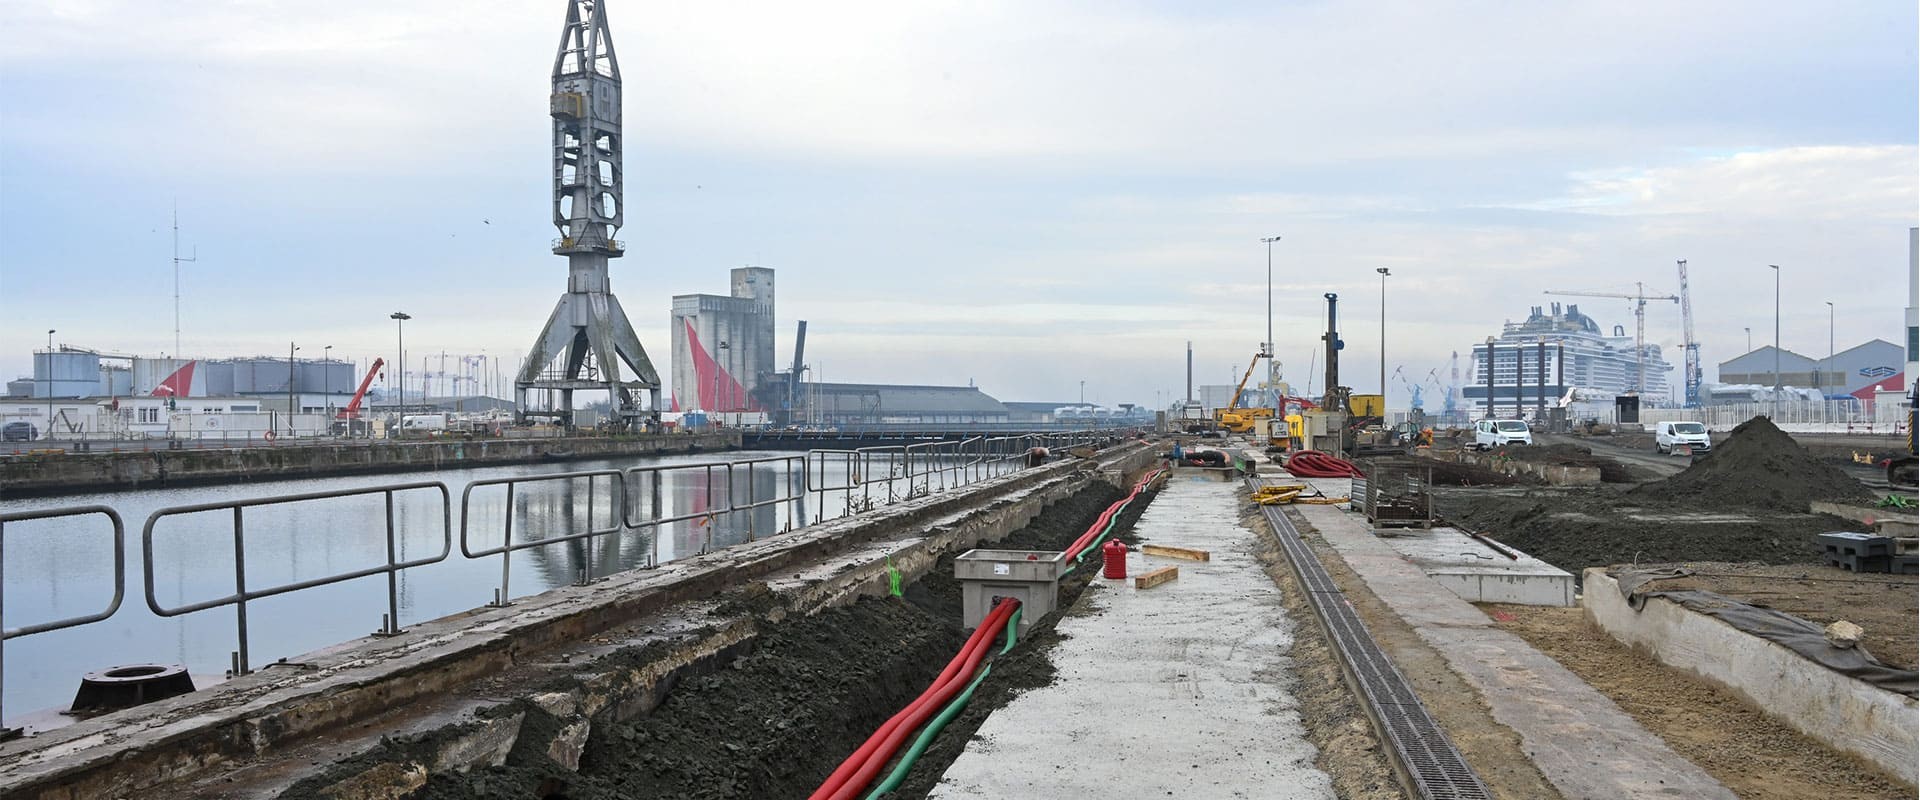 A Look at the Work at the Joubert Sluice Dock